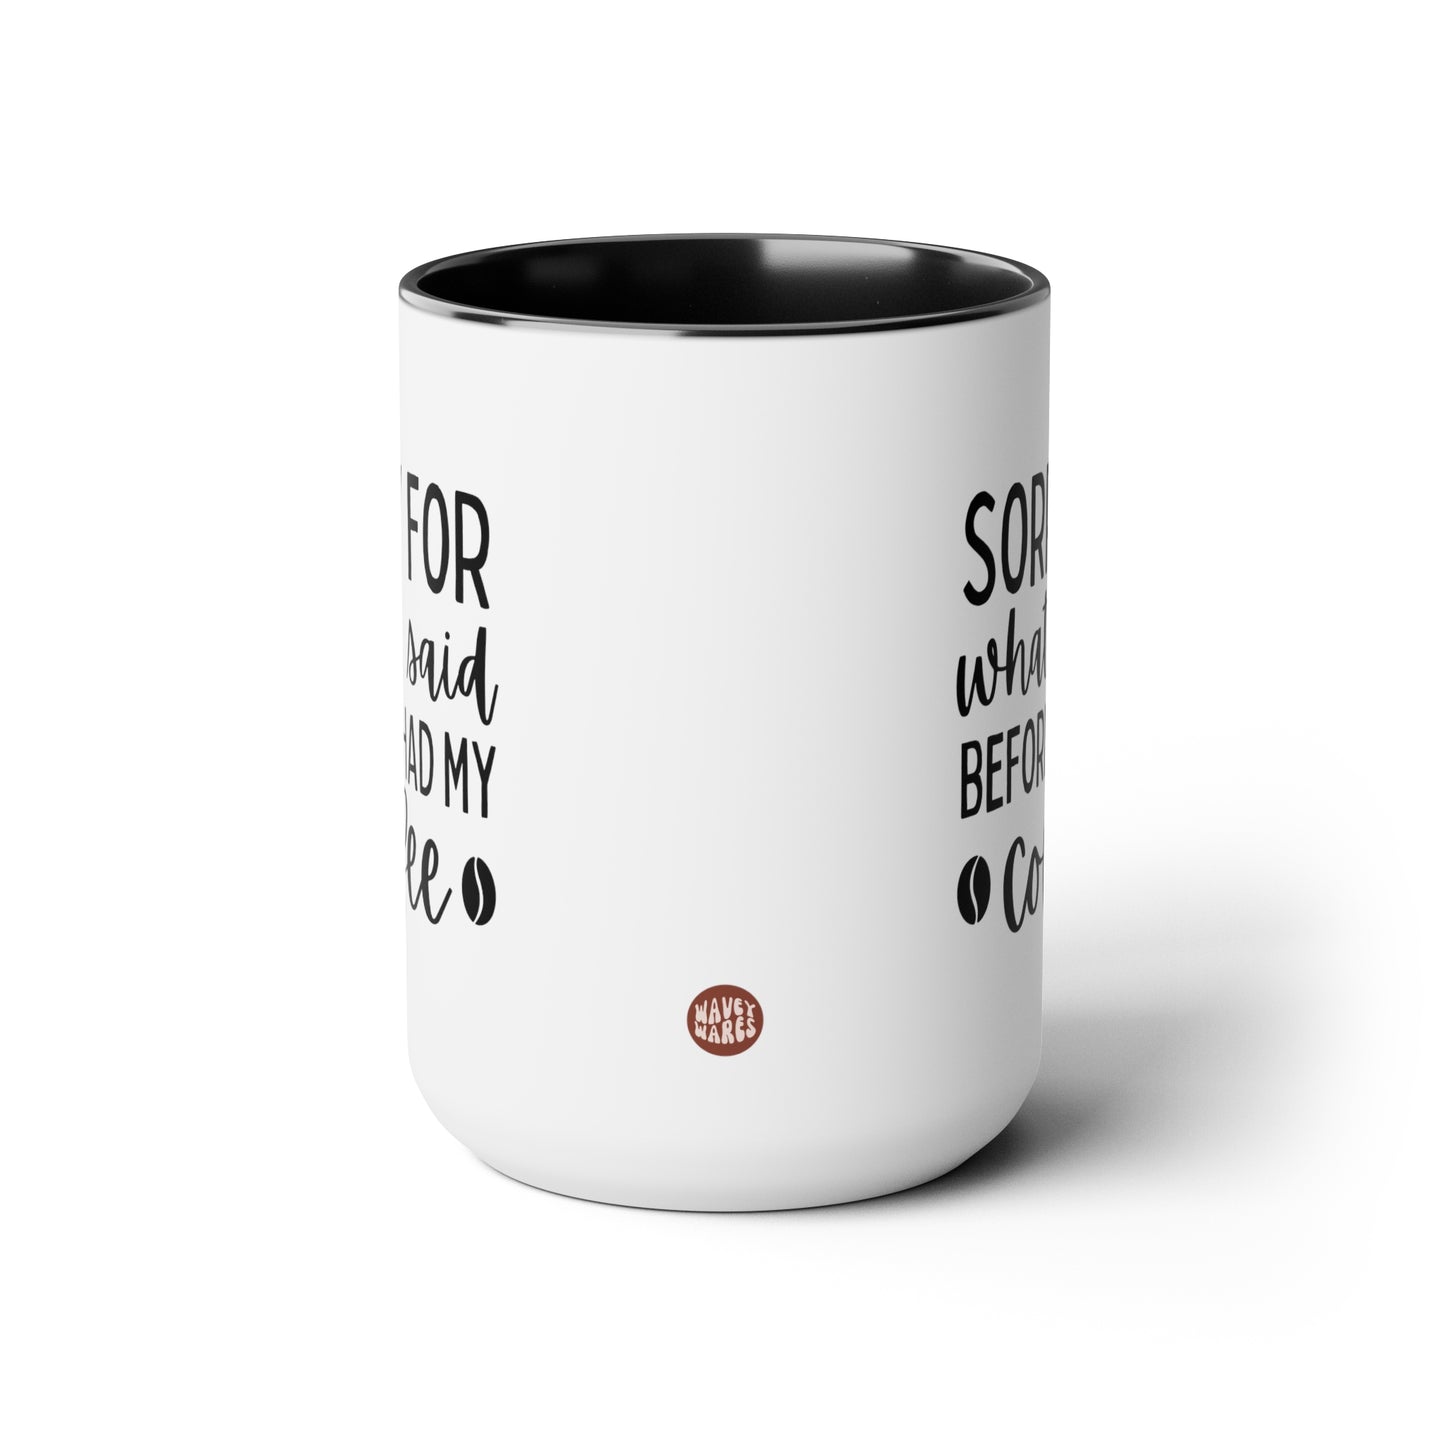 Sorry For What I Said Before I Had My Coffee 15oz white with black accent funny large coffee mug gift for friends family coffee lover fun present waveywares wavey wares wavywares wavy wares side